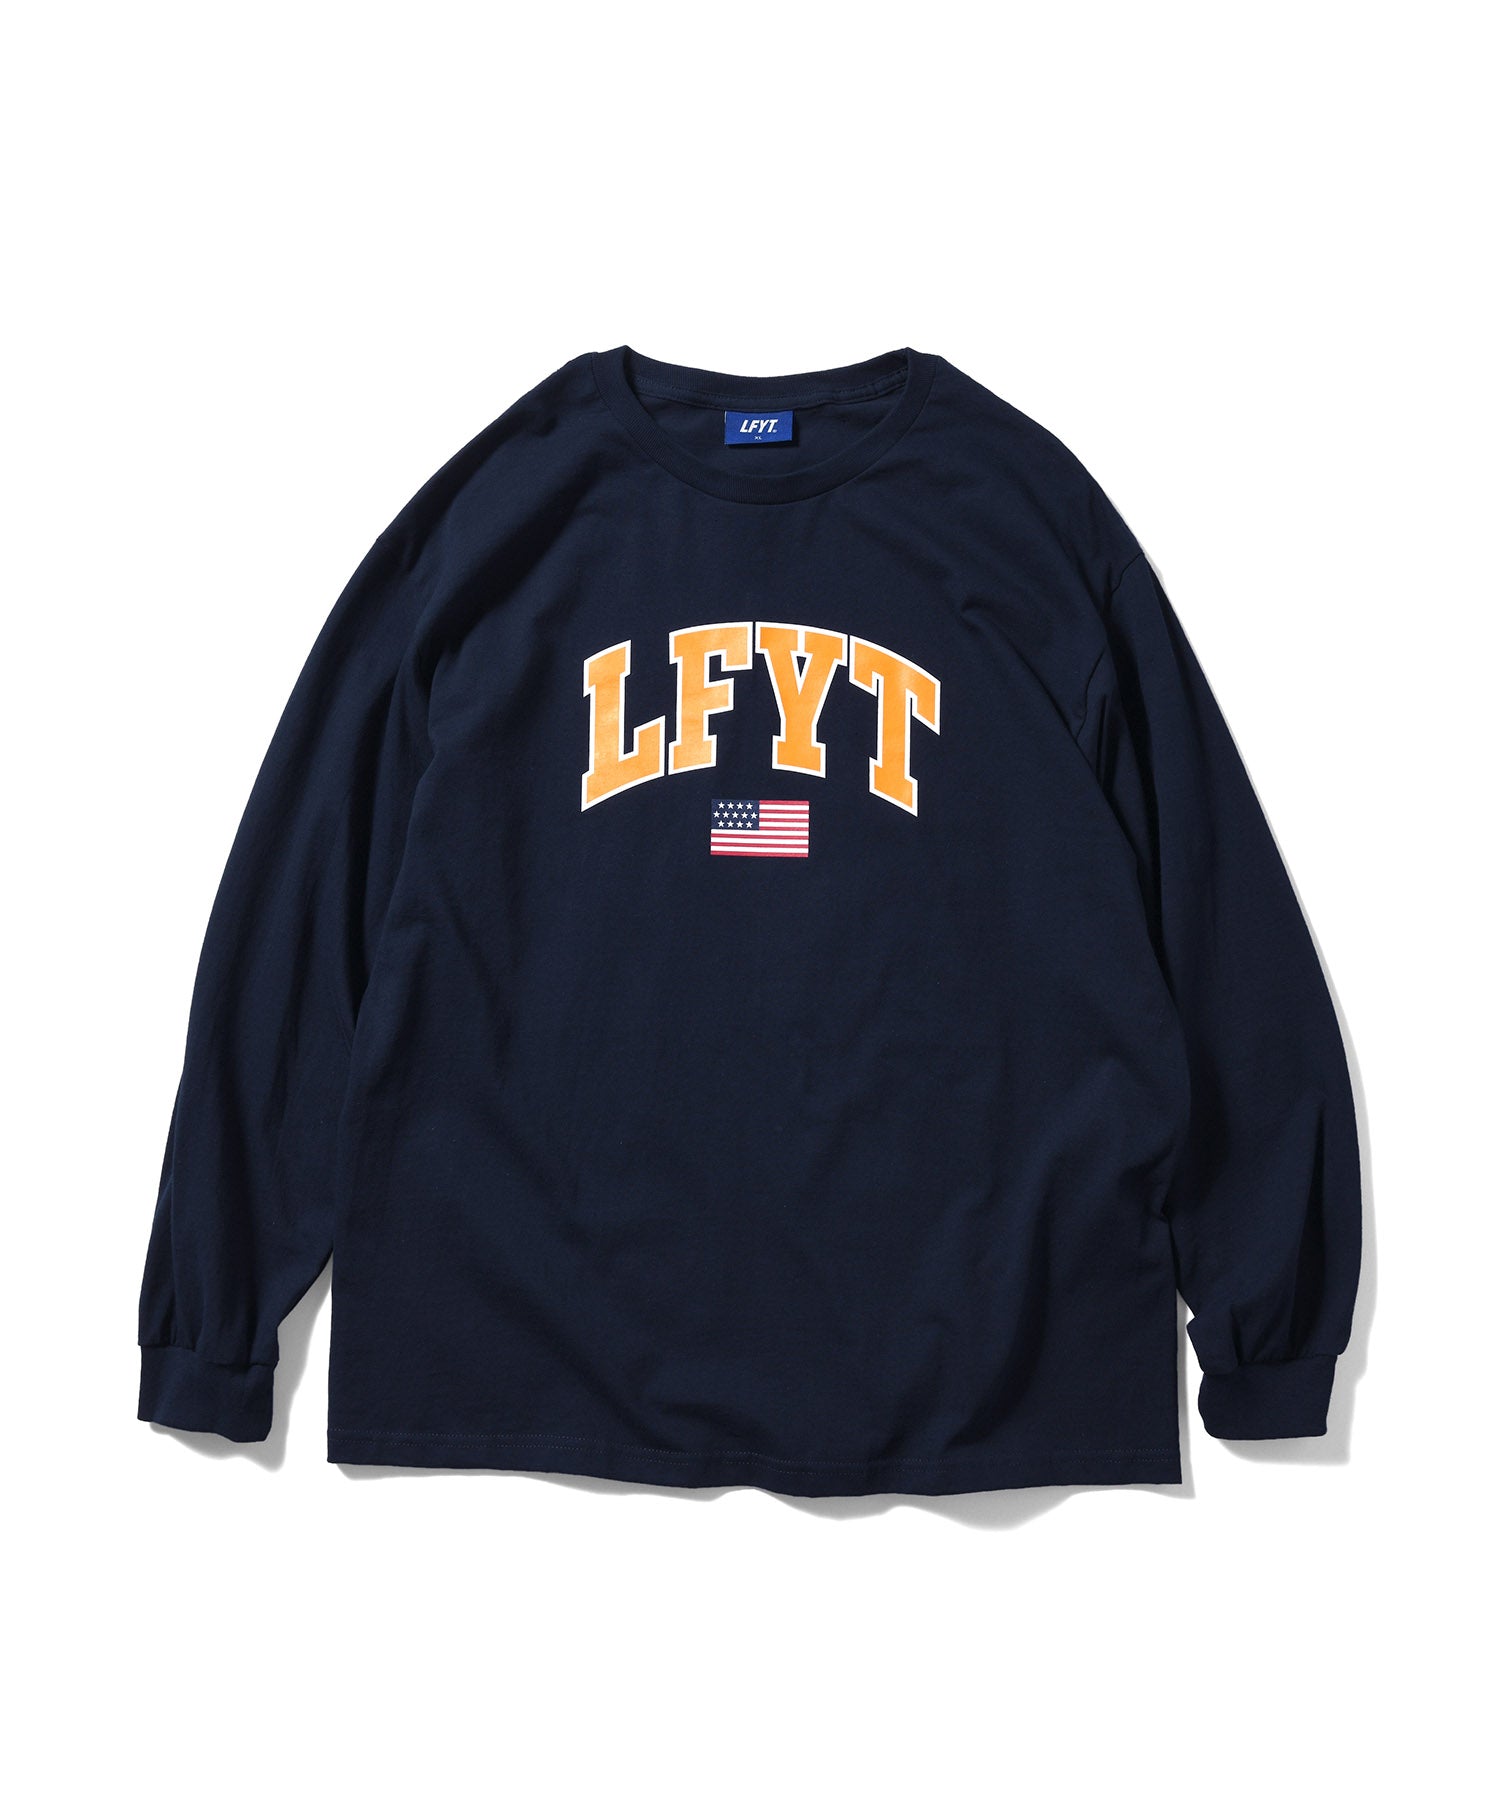 LFYT OLD GLORY ARCH LOGO L/S TEE LS220103 NAVY